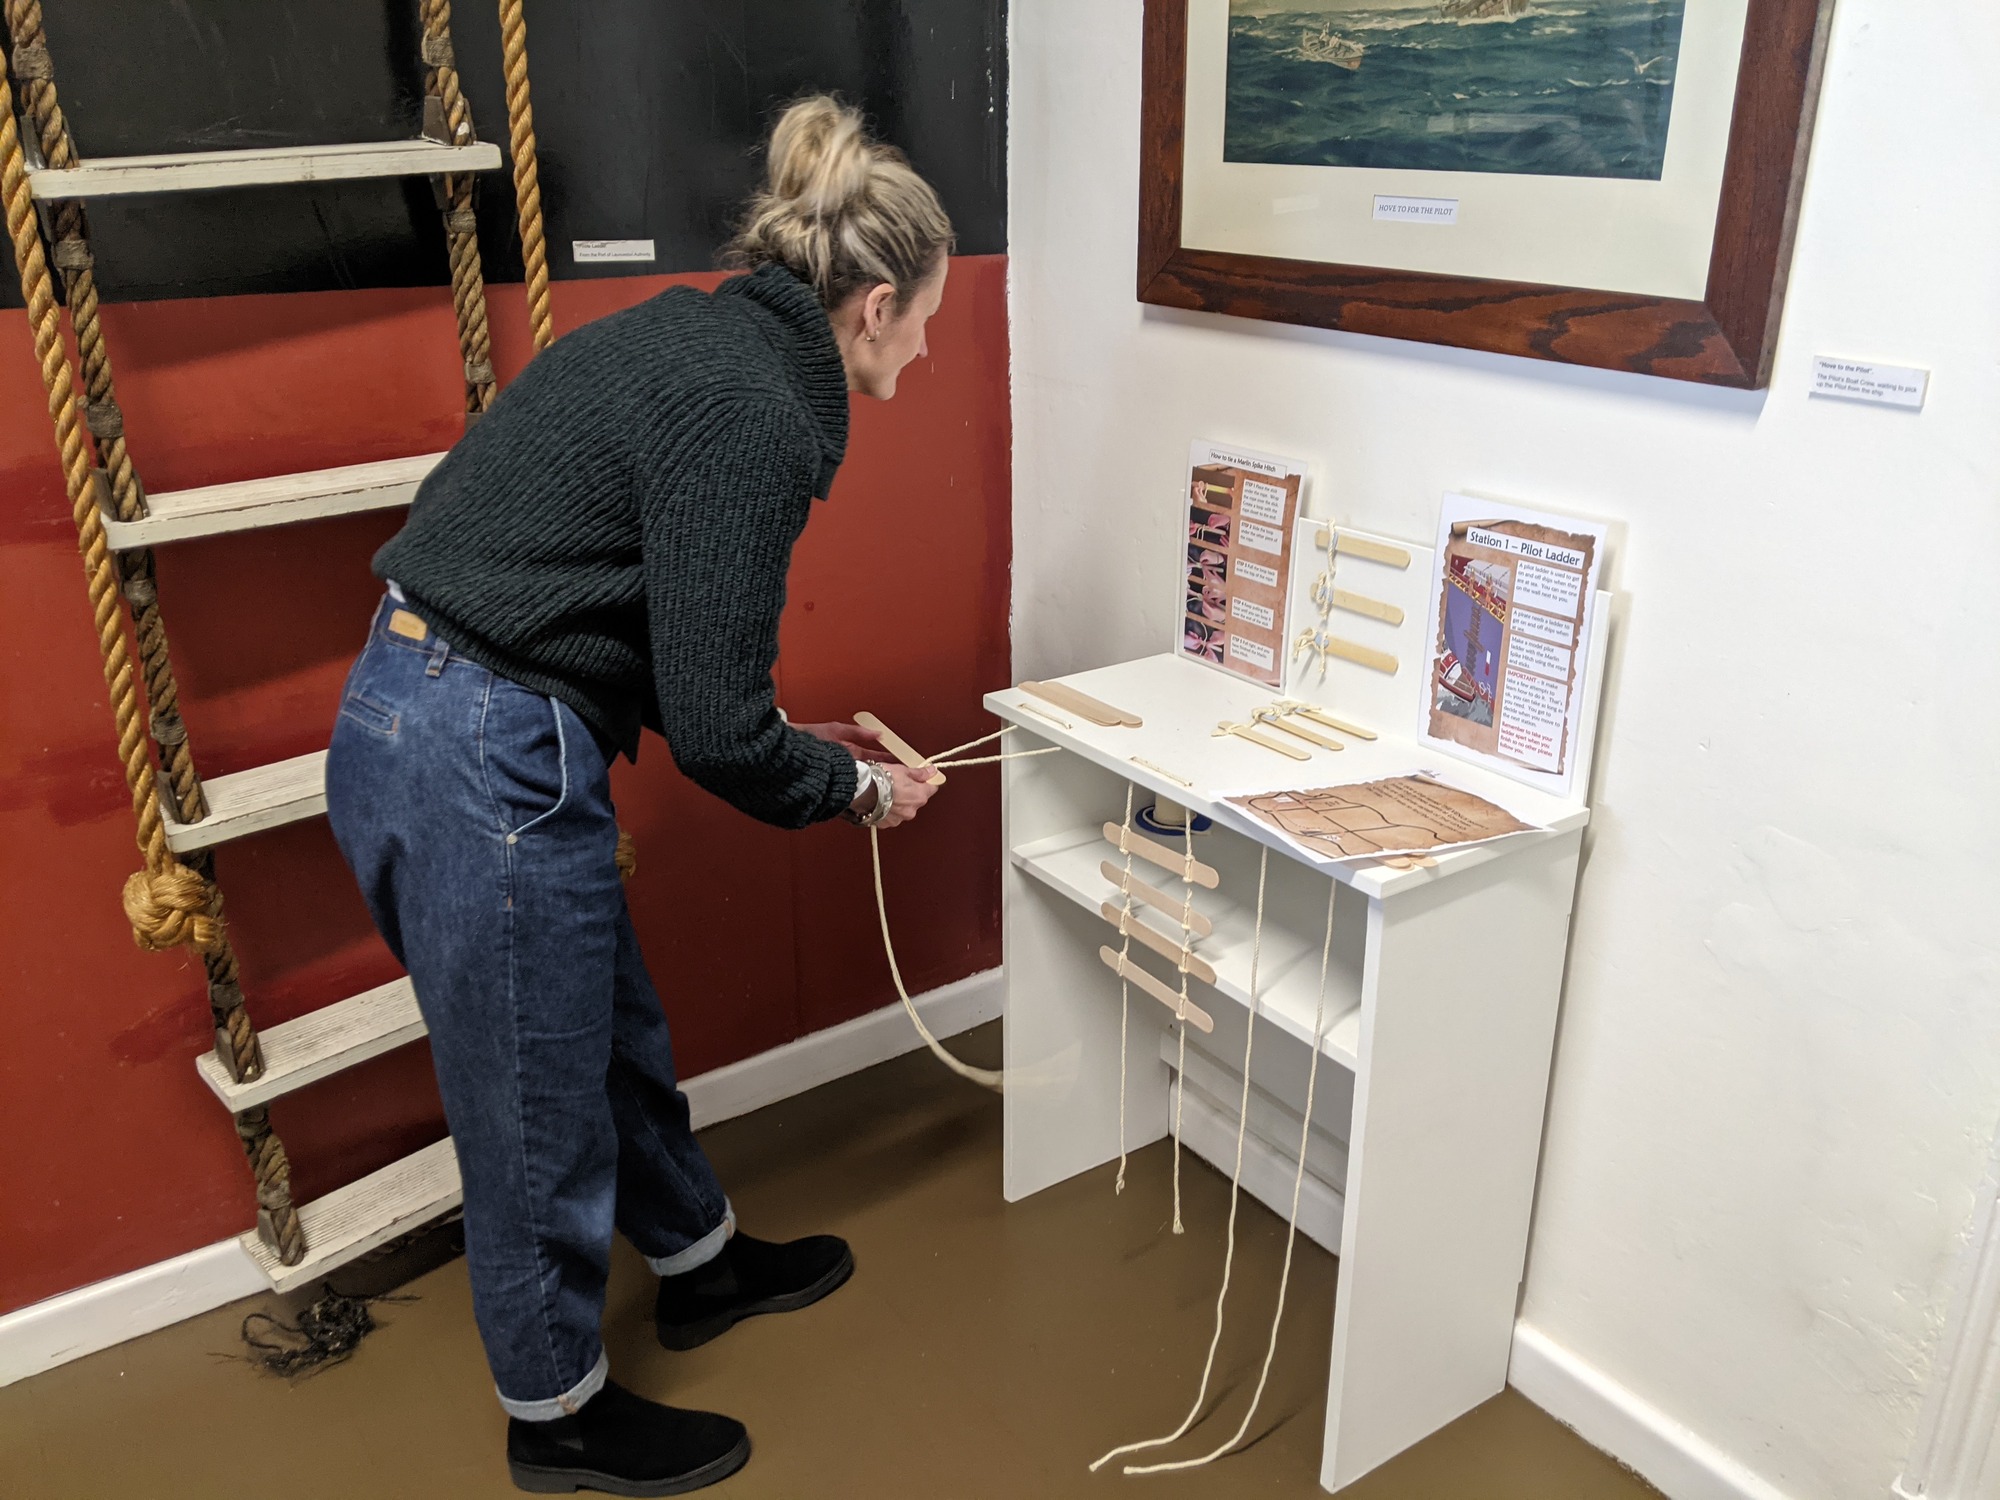 The Deputy Director of the Peter Underwood Centre, Becky Shelley, tests out the pirate map activity at the Low Head Pilot Station Maritime Museum. She is bent over a table with small handmade ladders on it, and is working through instructions on an activity sheet.